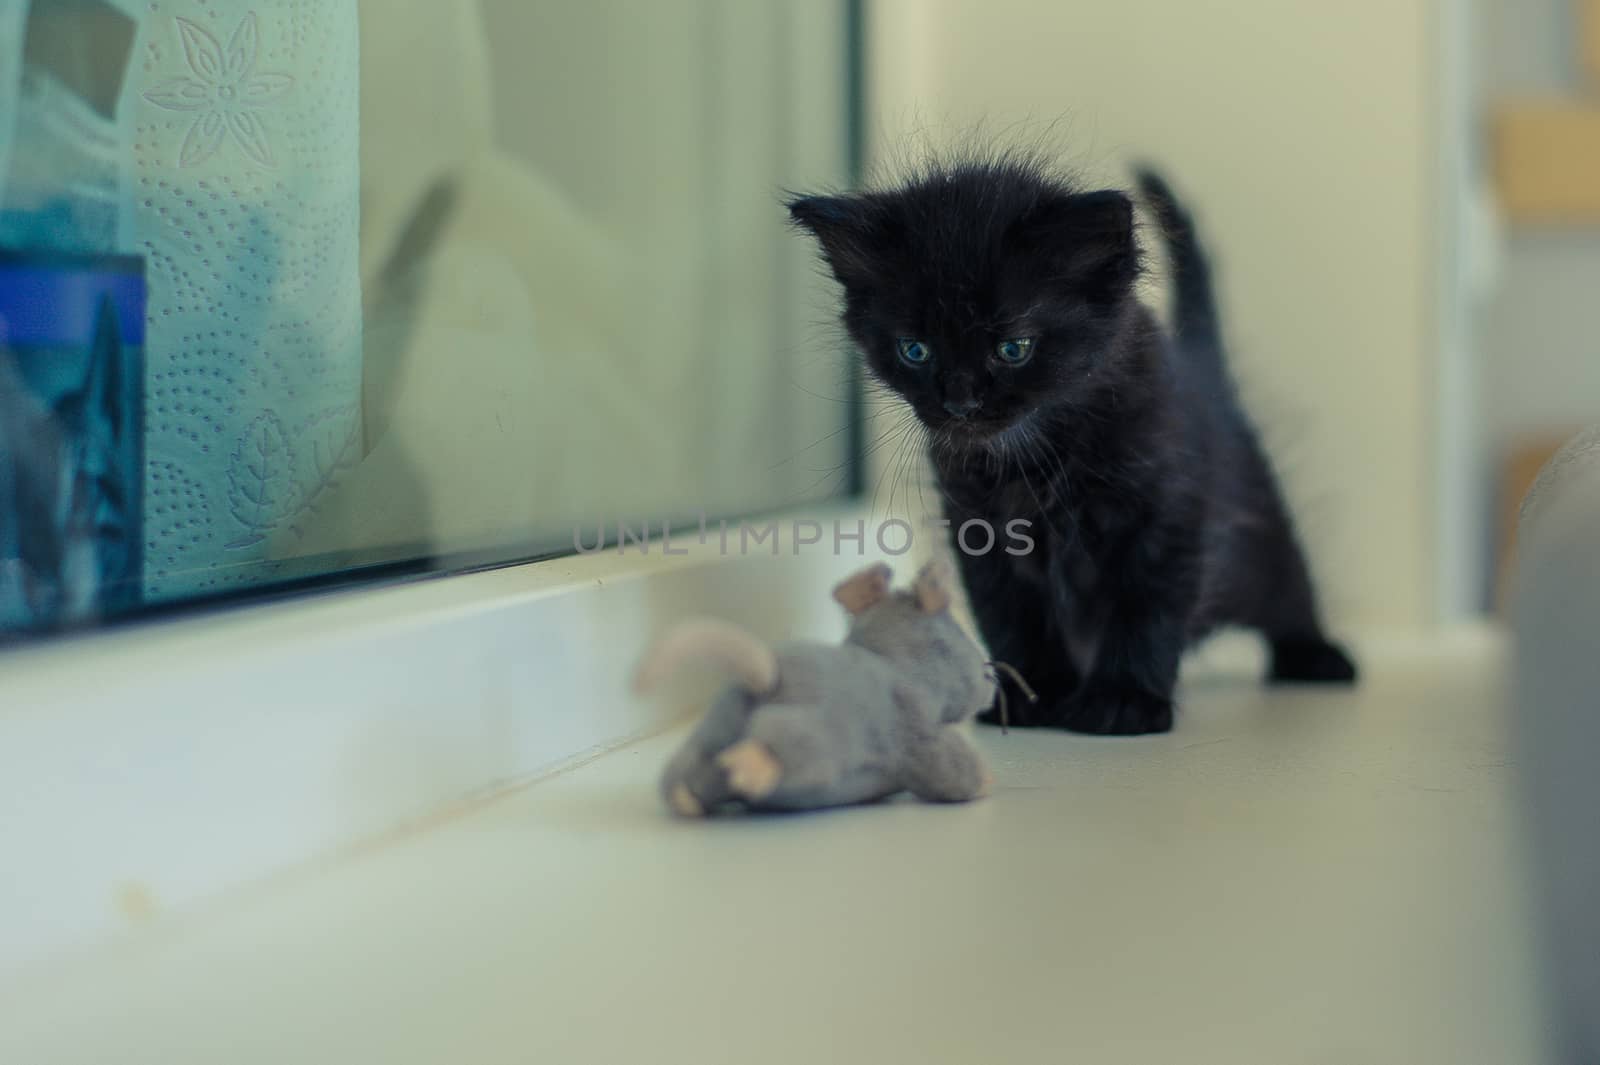 black kitten is played on the windowsill with a toy gray mouse by chernobrovin